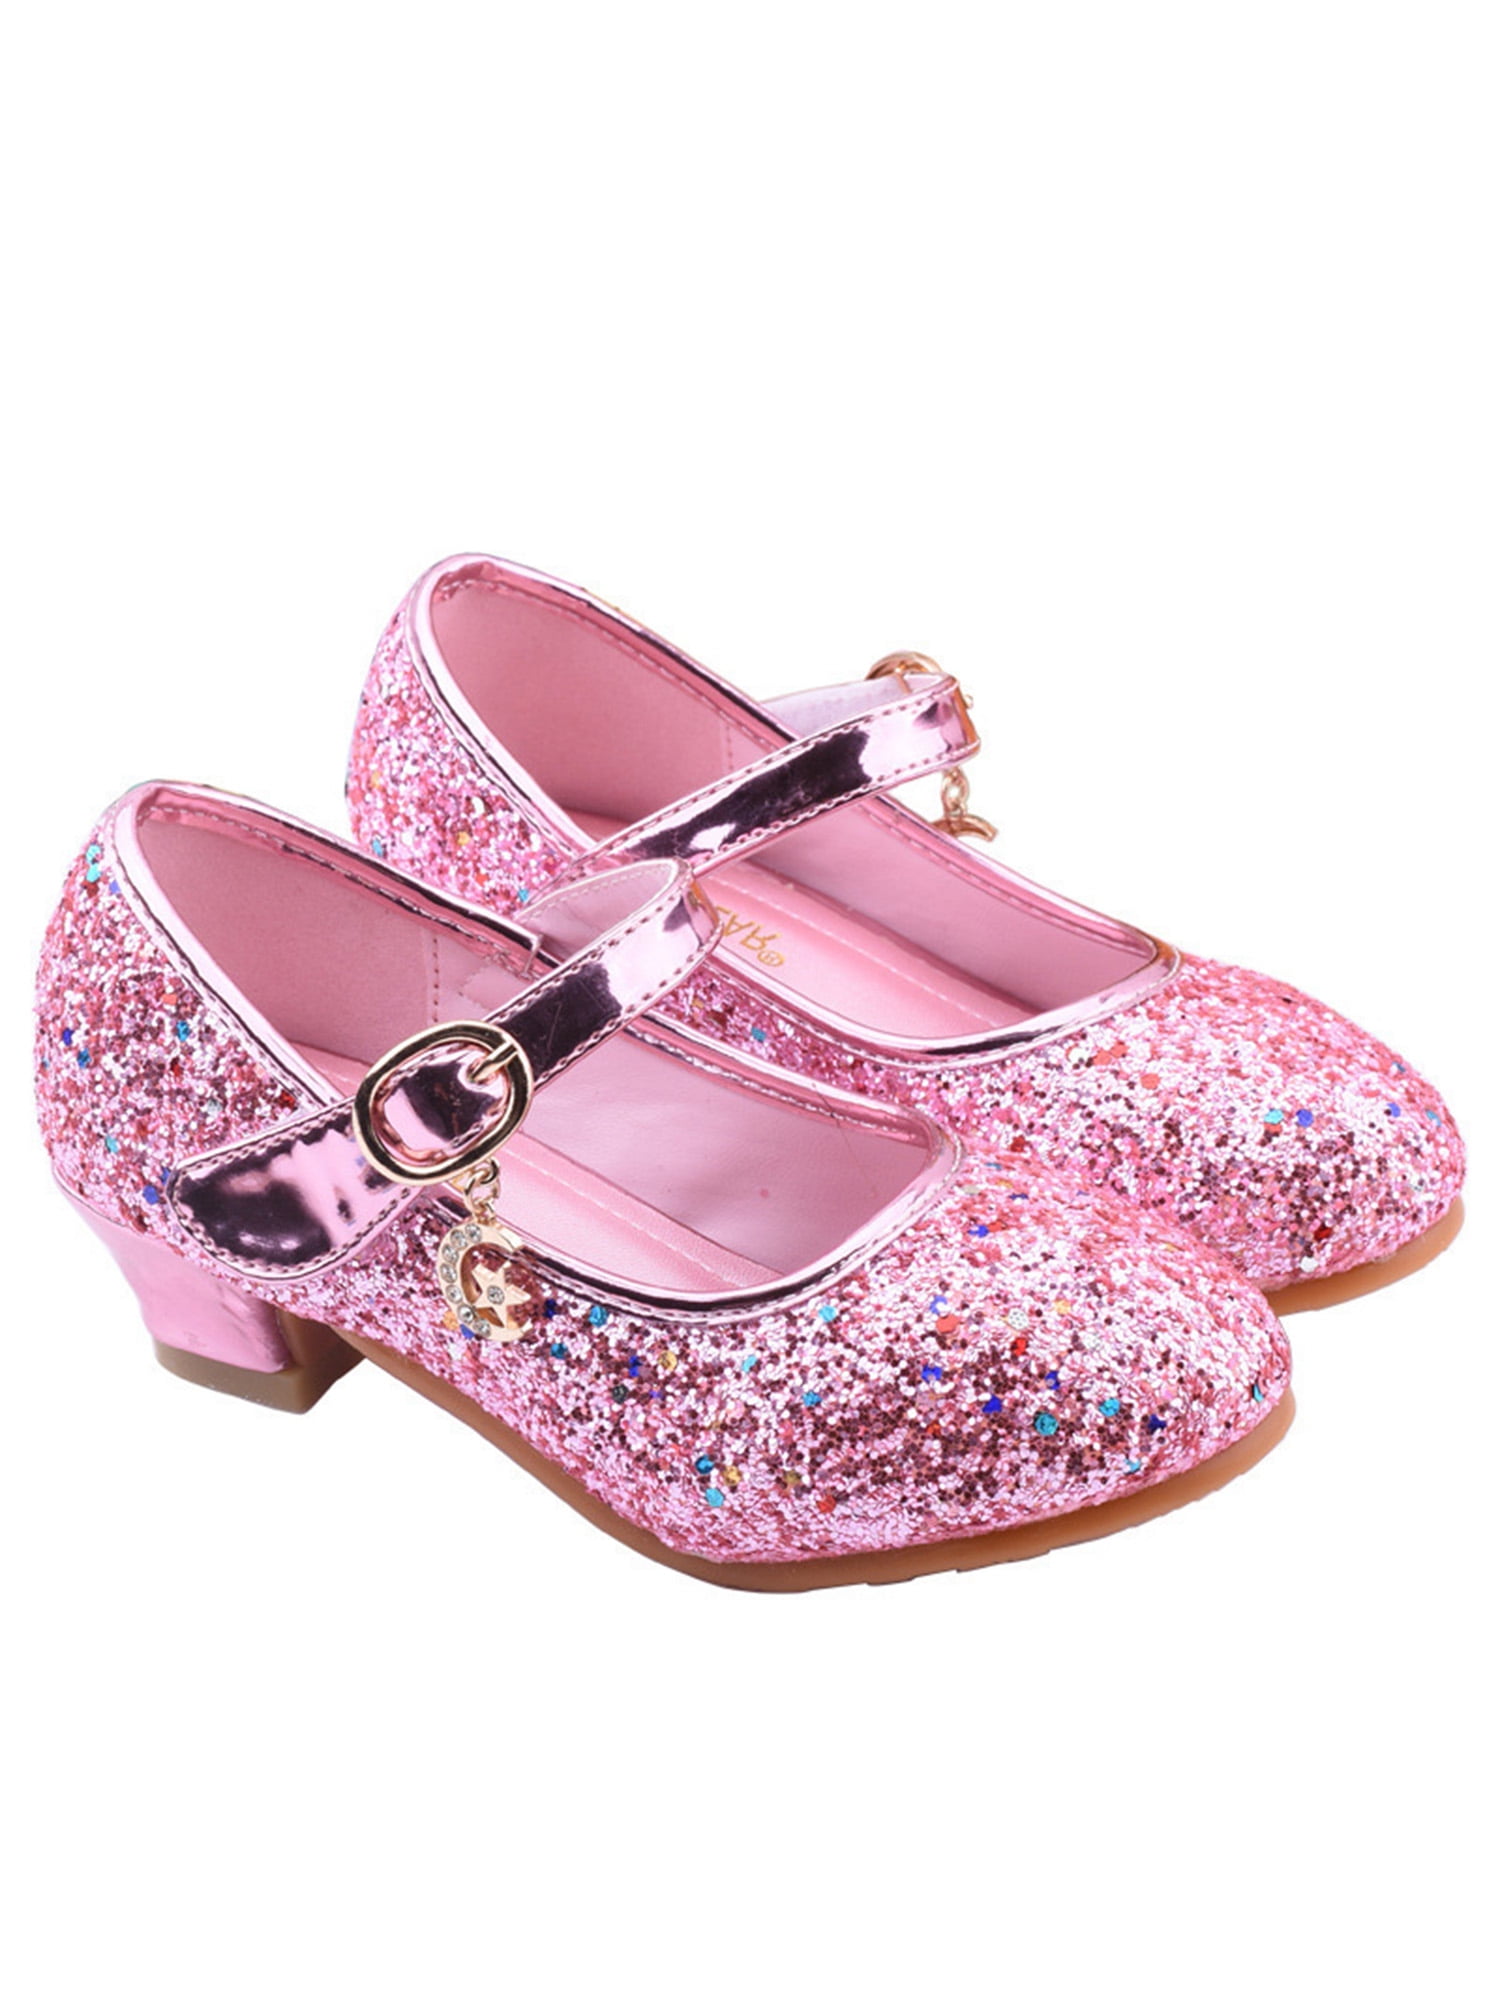 Girls Sparkle Princess Crystal Shoes Mary Jane Dance Shoes Birthday Party Flat Shoes 